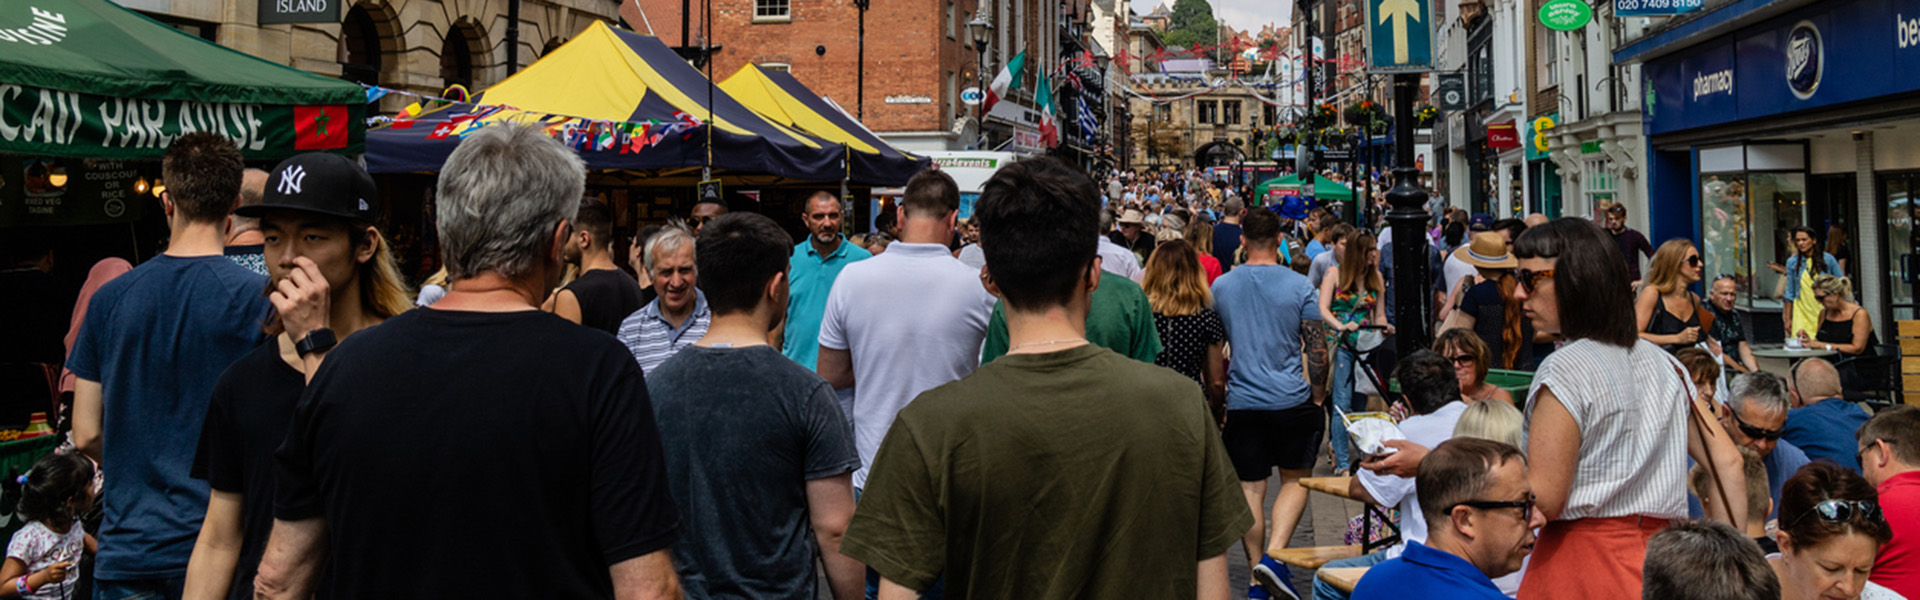 Crowds of people in a street in Lincoln